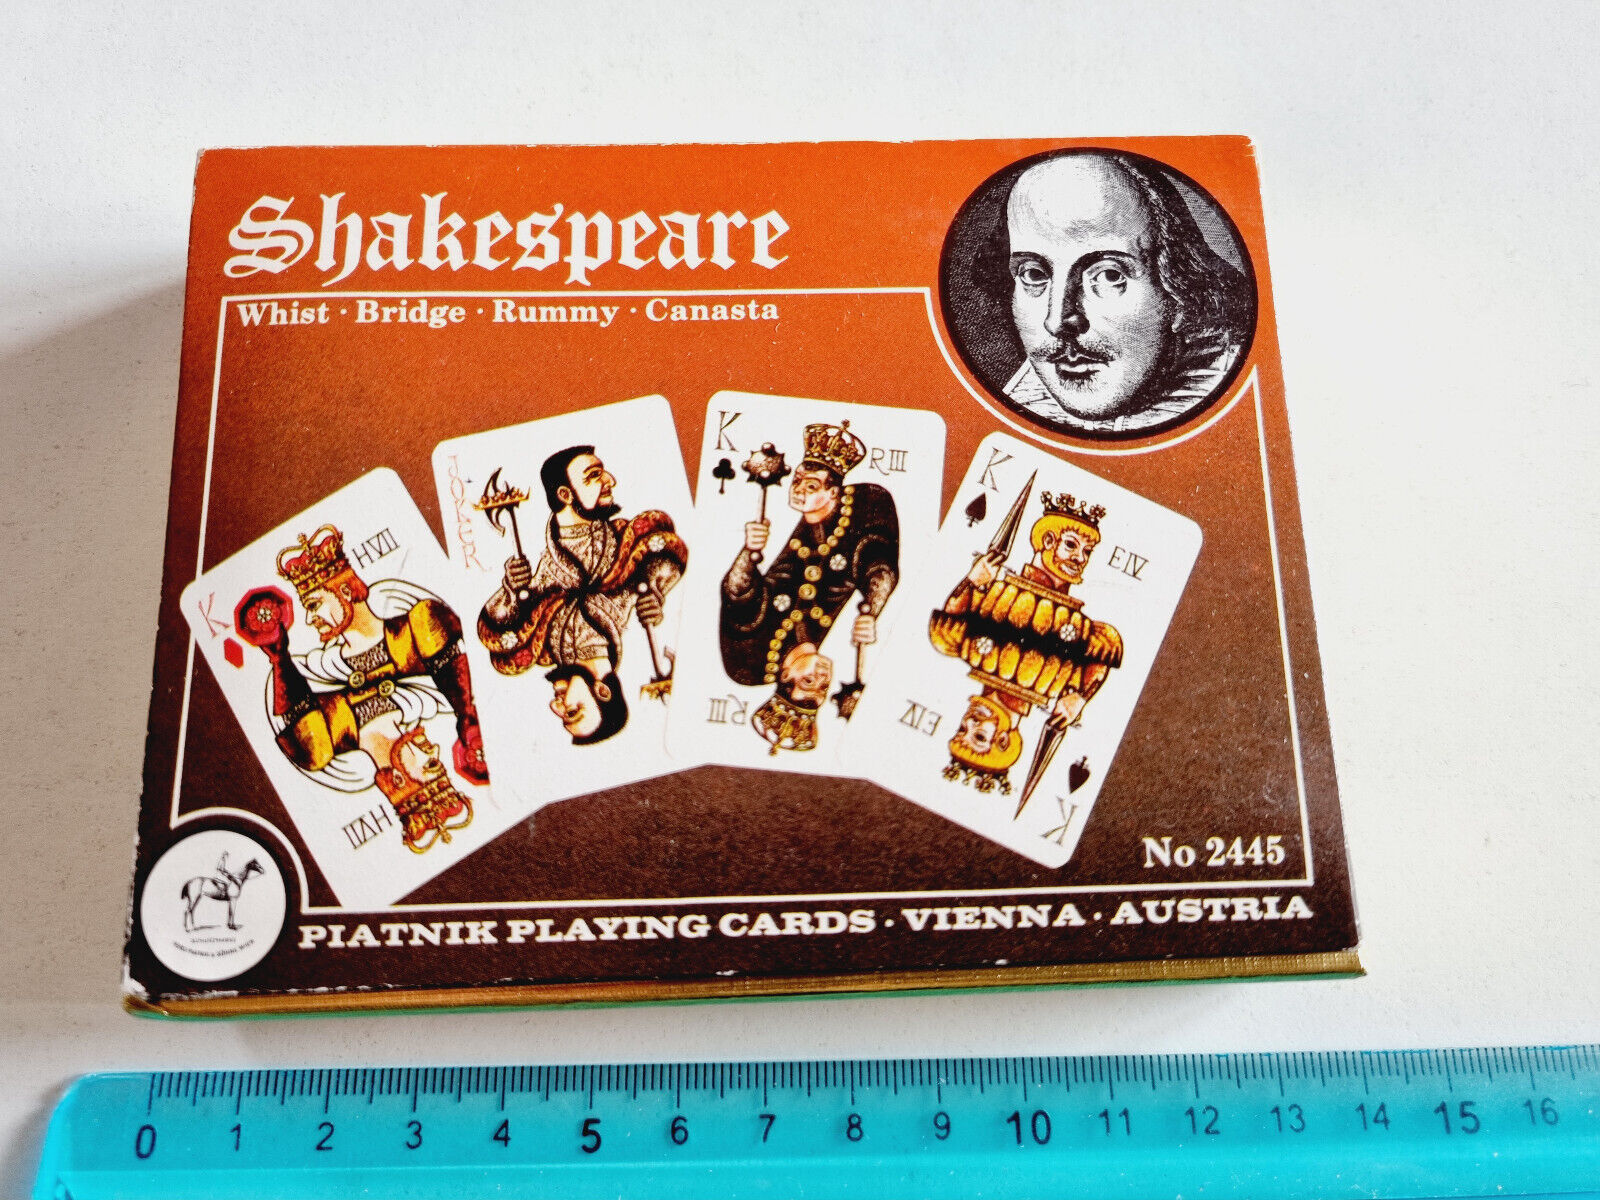 VINTAGE ORIGINAL PLAYING CARDS SHAKESPEARE PIATNIK 2445 RUMMY PLAYING CARDS NEW